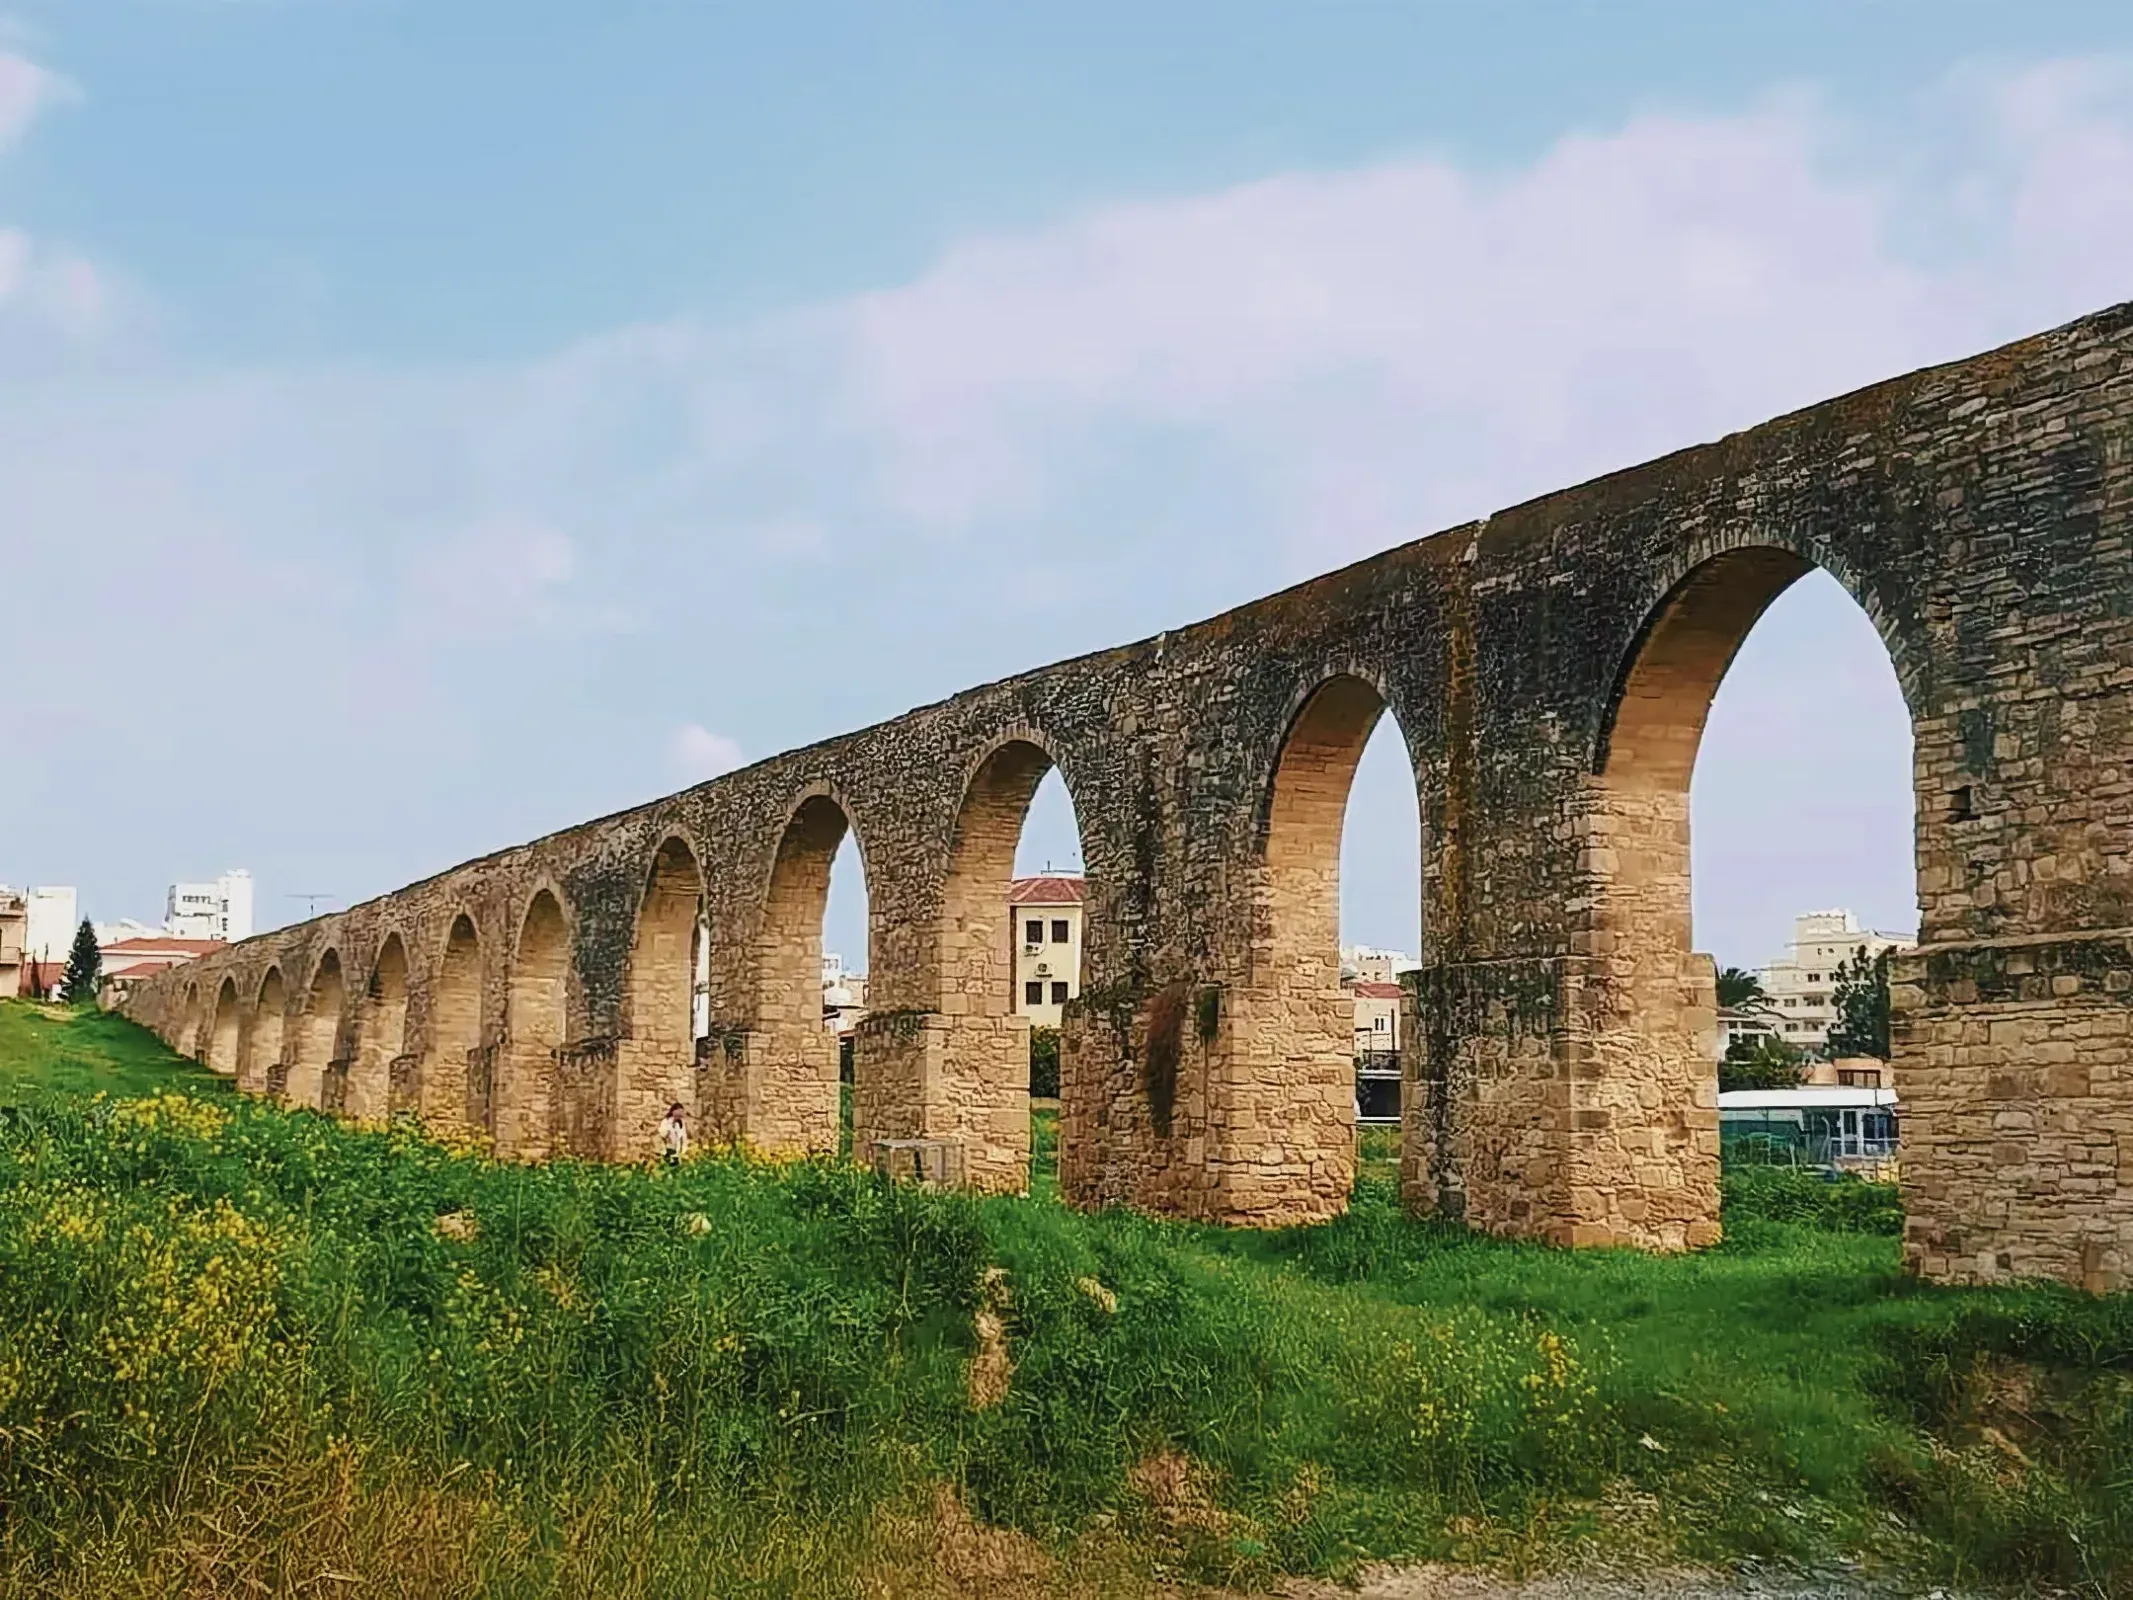 A stunning stone bridge with arches set against the Skopje Aqueduct in Larnaca, Cyprus.